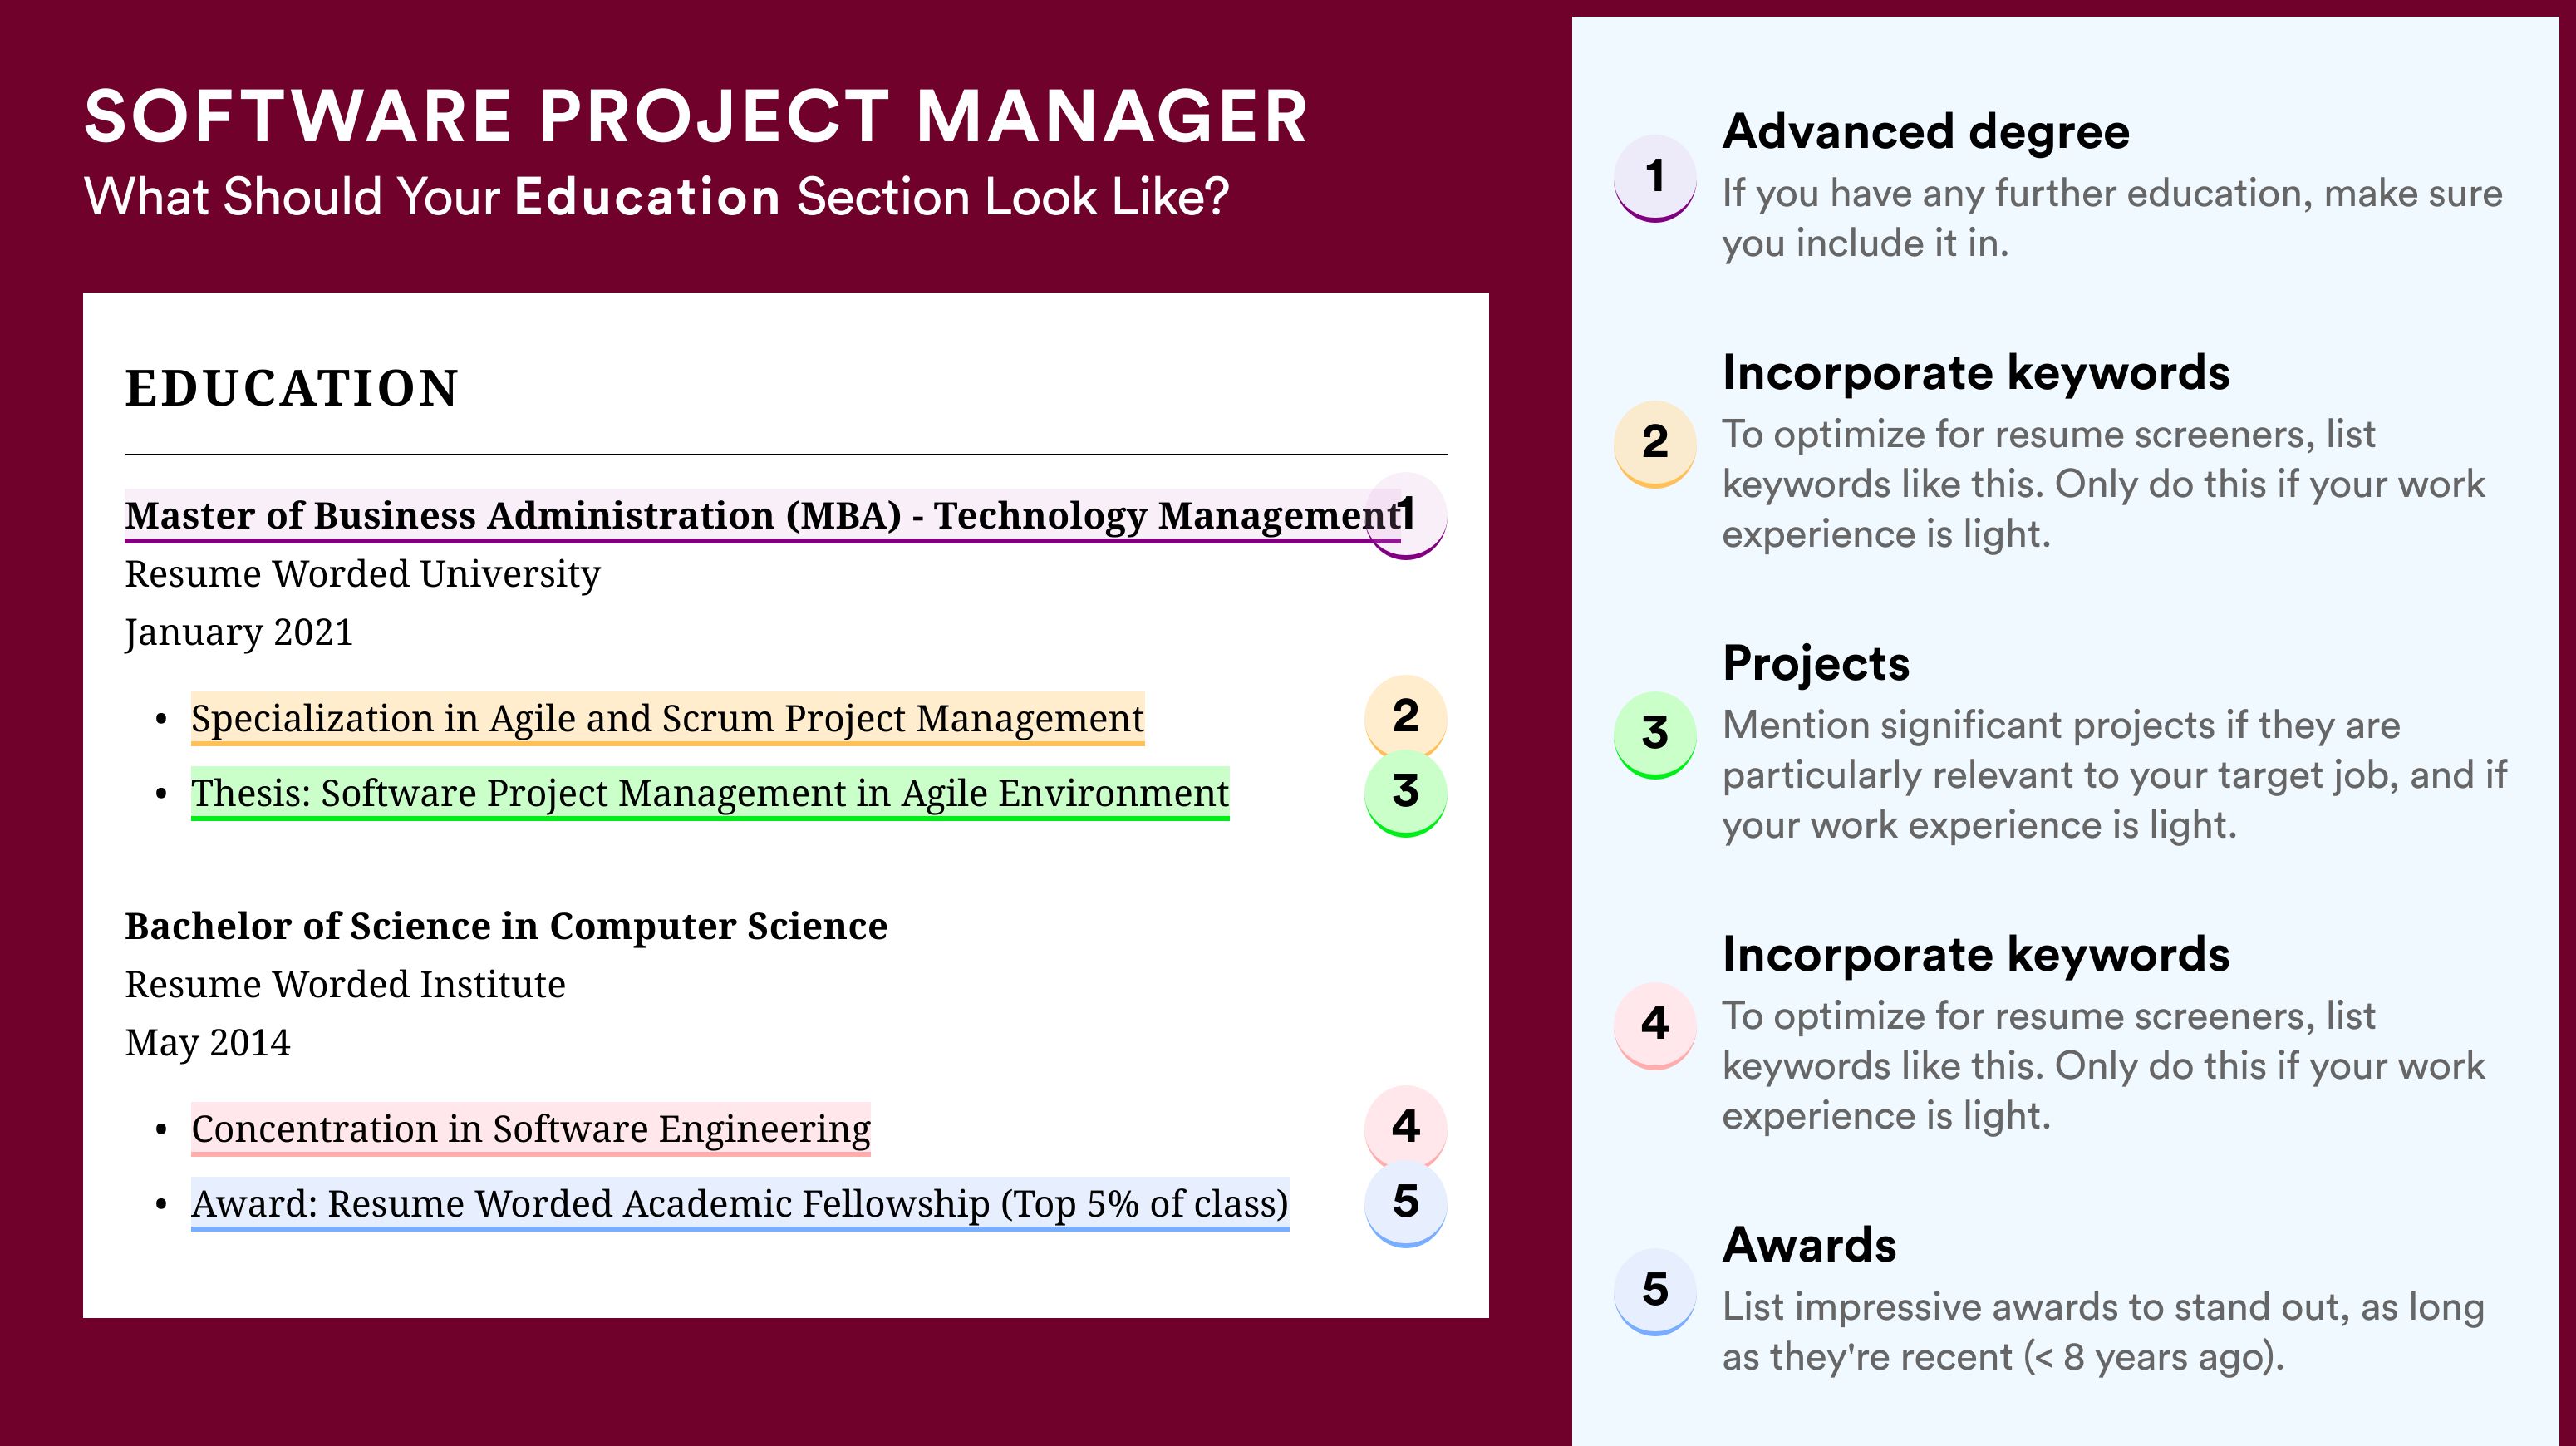 How To Write An Education Section - Software Project Manager Roles